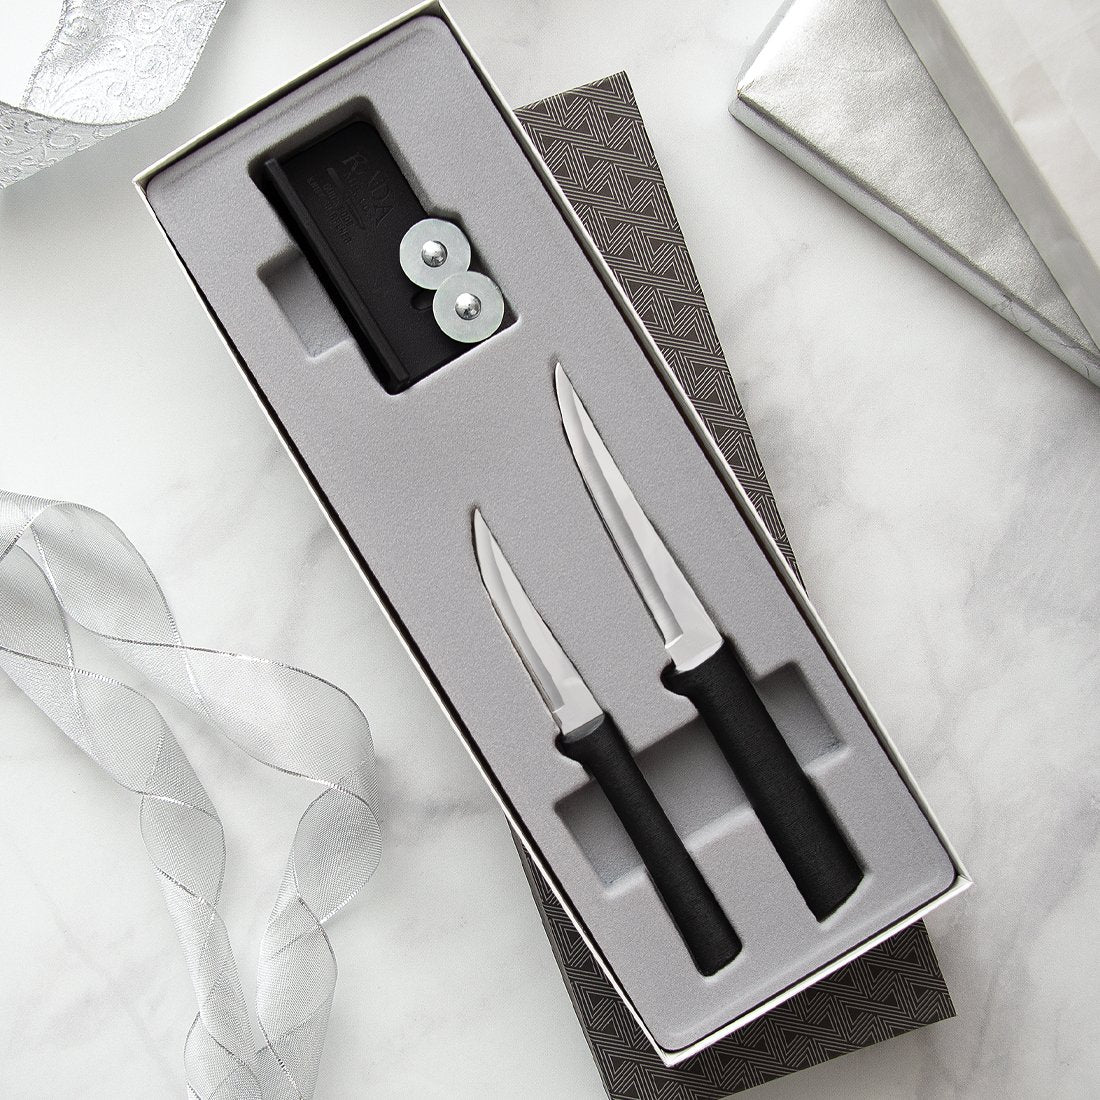 Sale: Paring Knives Galore Gift Box Set by Rada Cutlery Made in